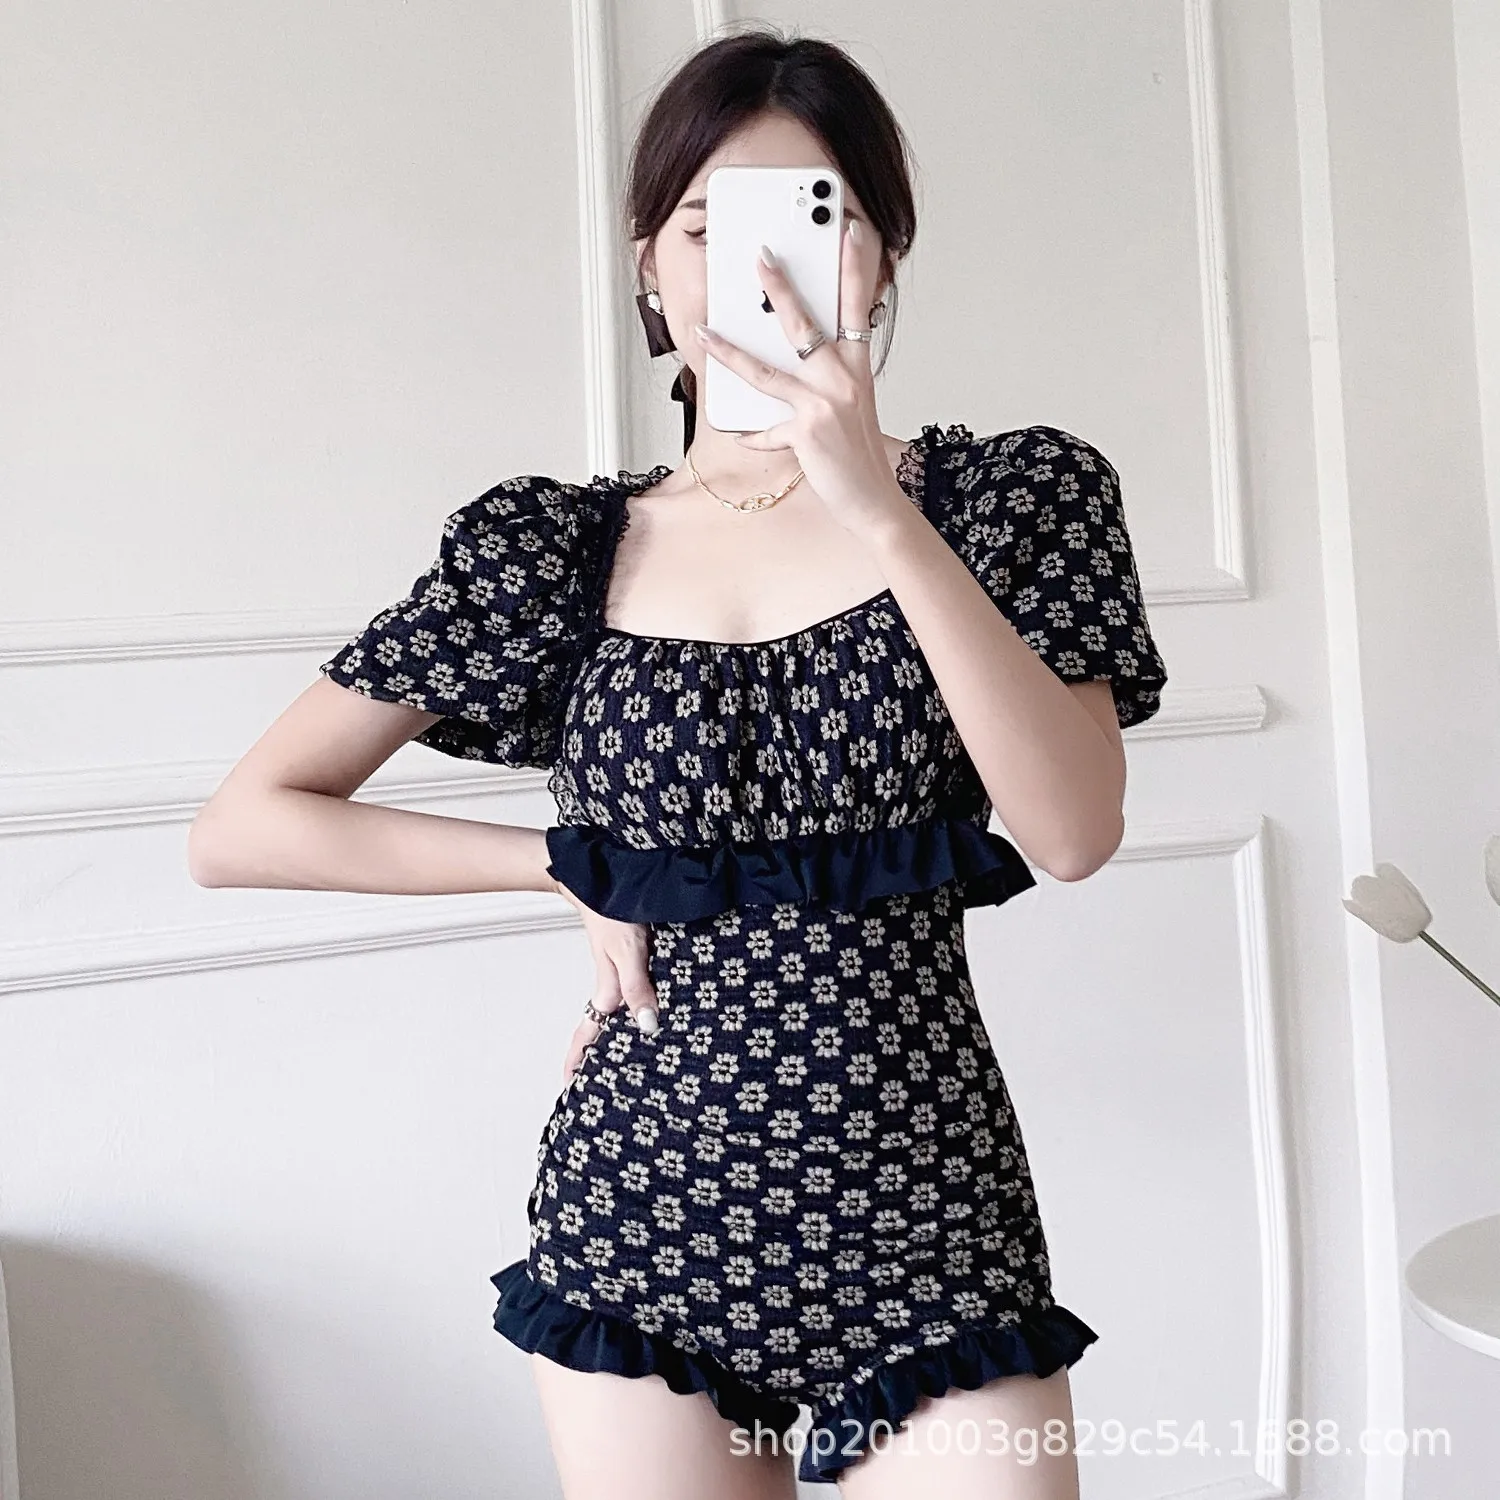 

New Hot Selling One-piece Swimsuit Female Sexy Square Neck Conservative Pure Lust Black Slim Korean Lace Cute Student Swimsuit